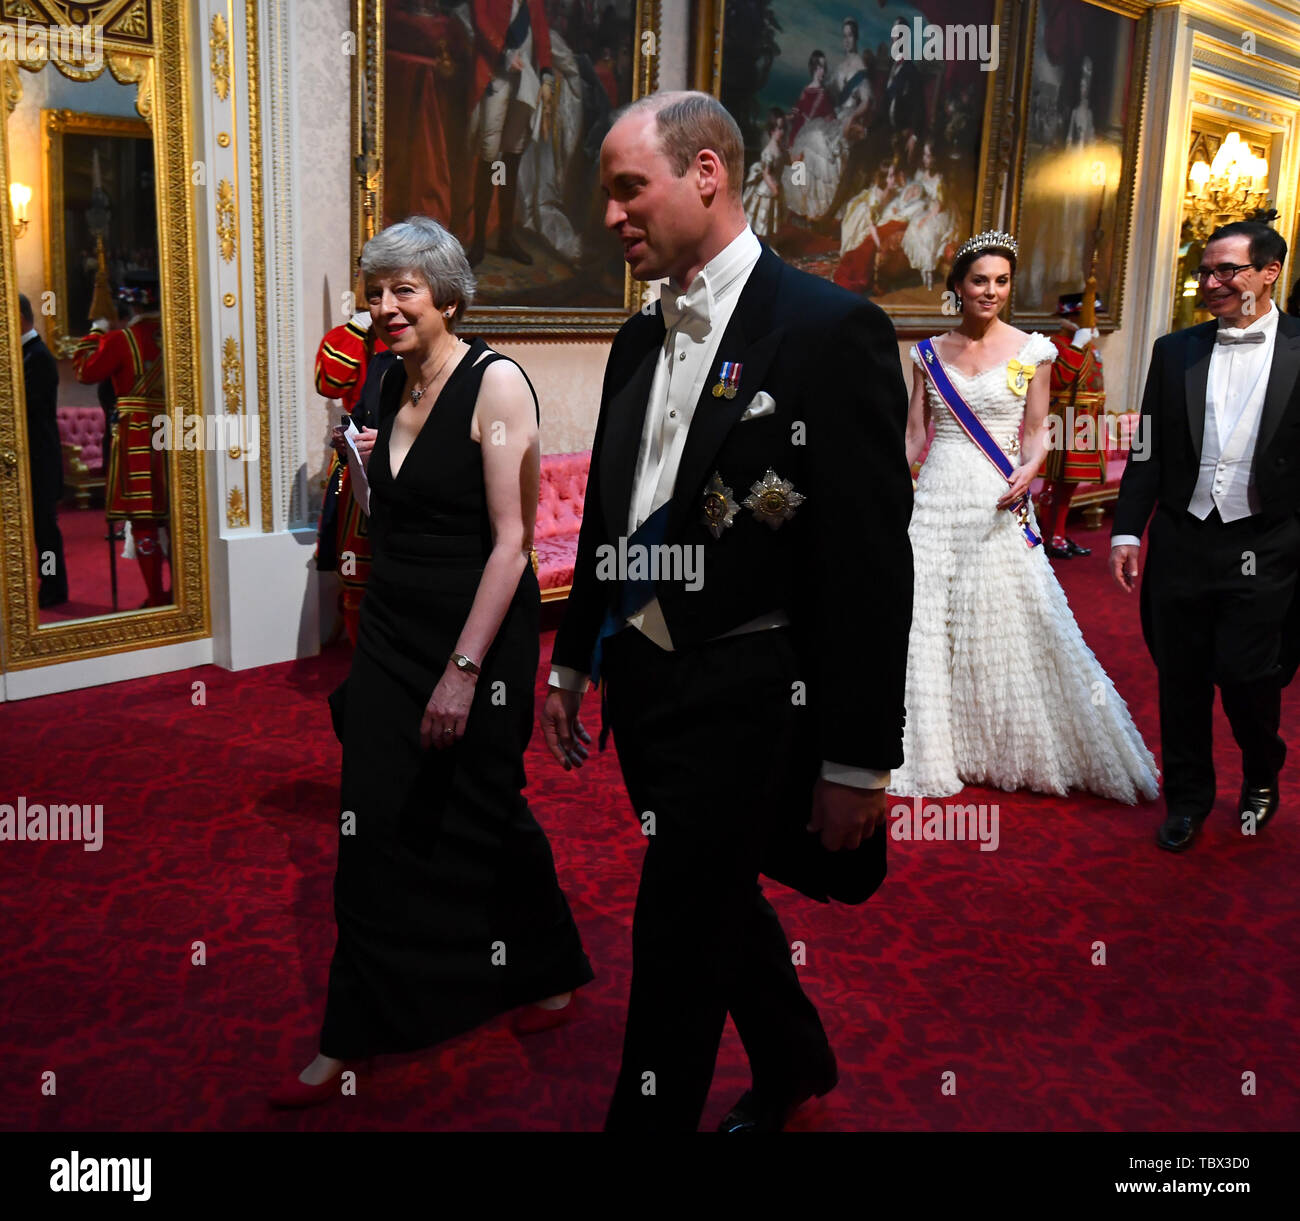 Prime Minister Theresa May and the Duke of Cambridge, followed by the Duchess of Cambridge and United States Secretary of the Treasury, Steven Mnuchin, as they arrive through the East Gallery during the State Banquet at Buckingham Palace, London, on day one of the US President's three day state visit to the UK. Stock Photo